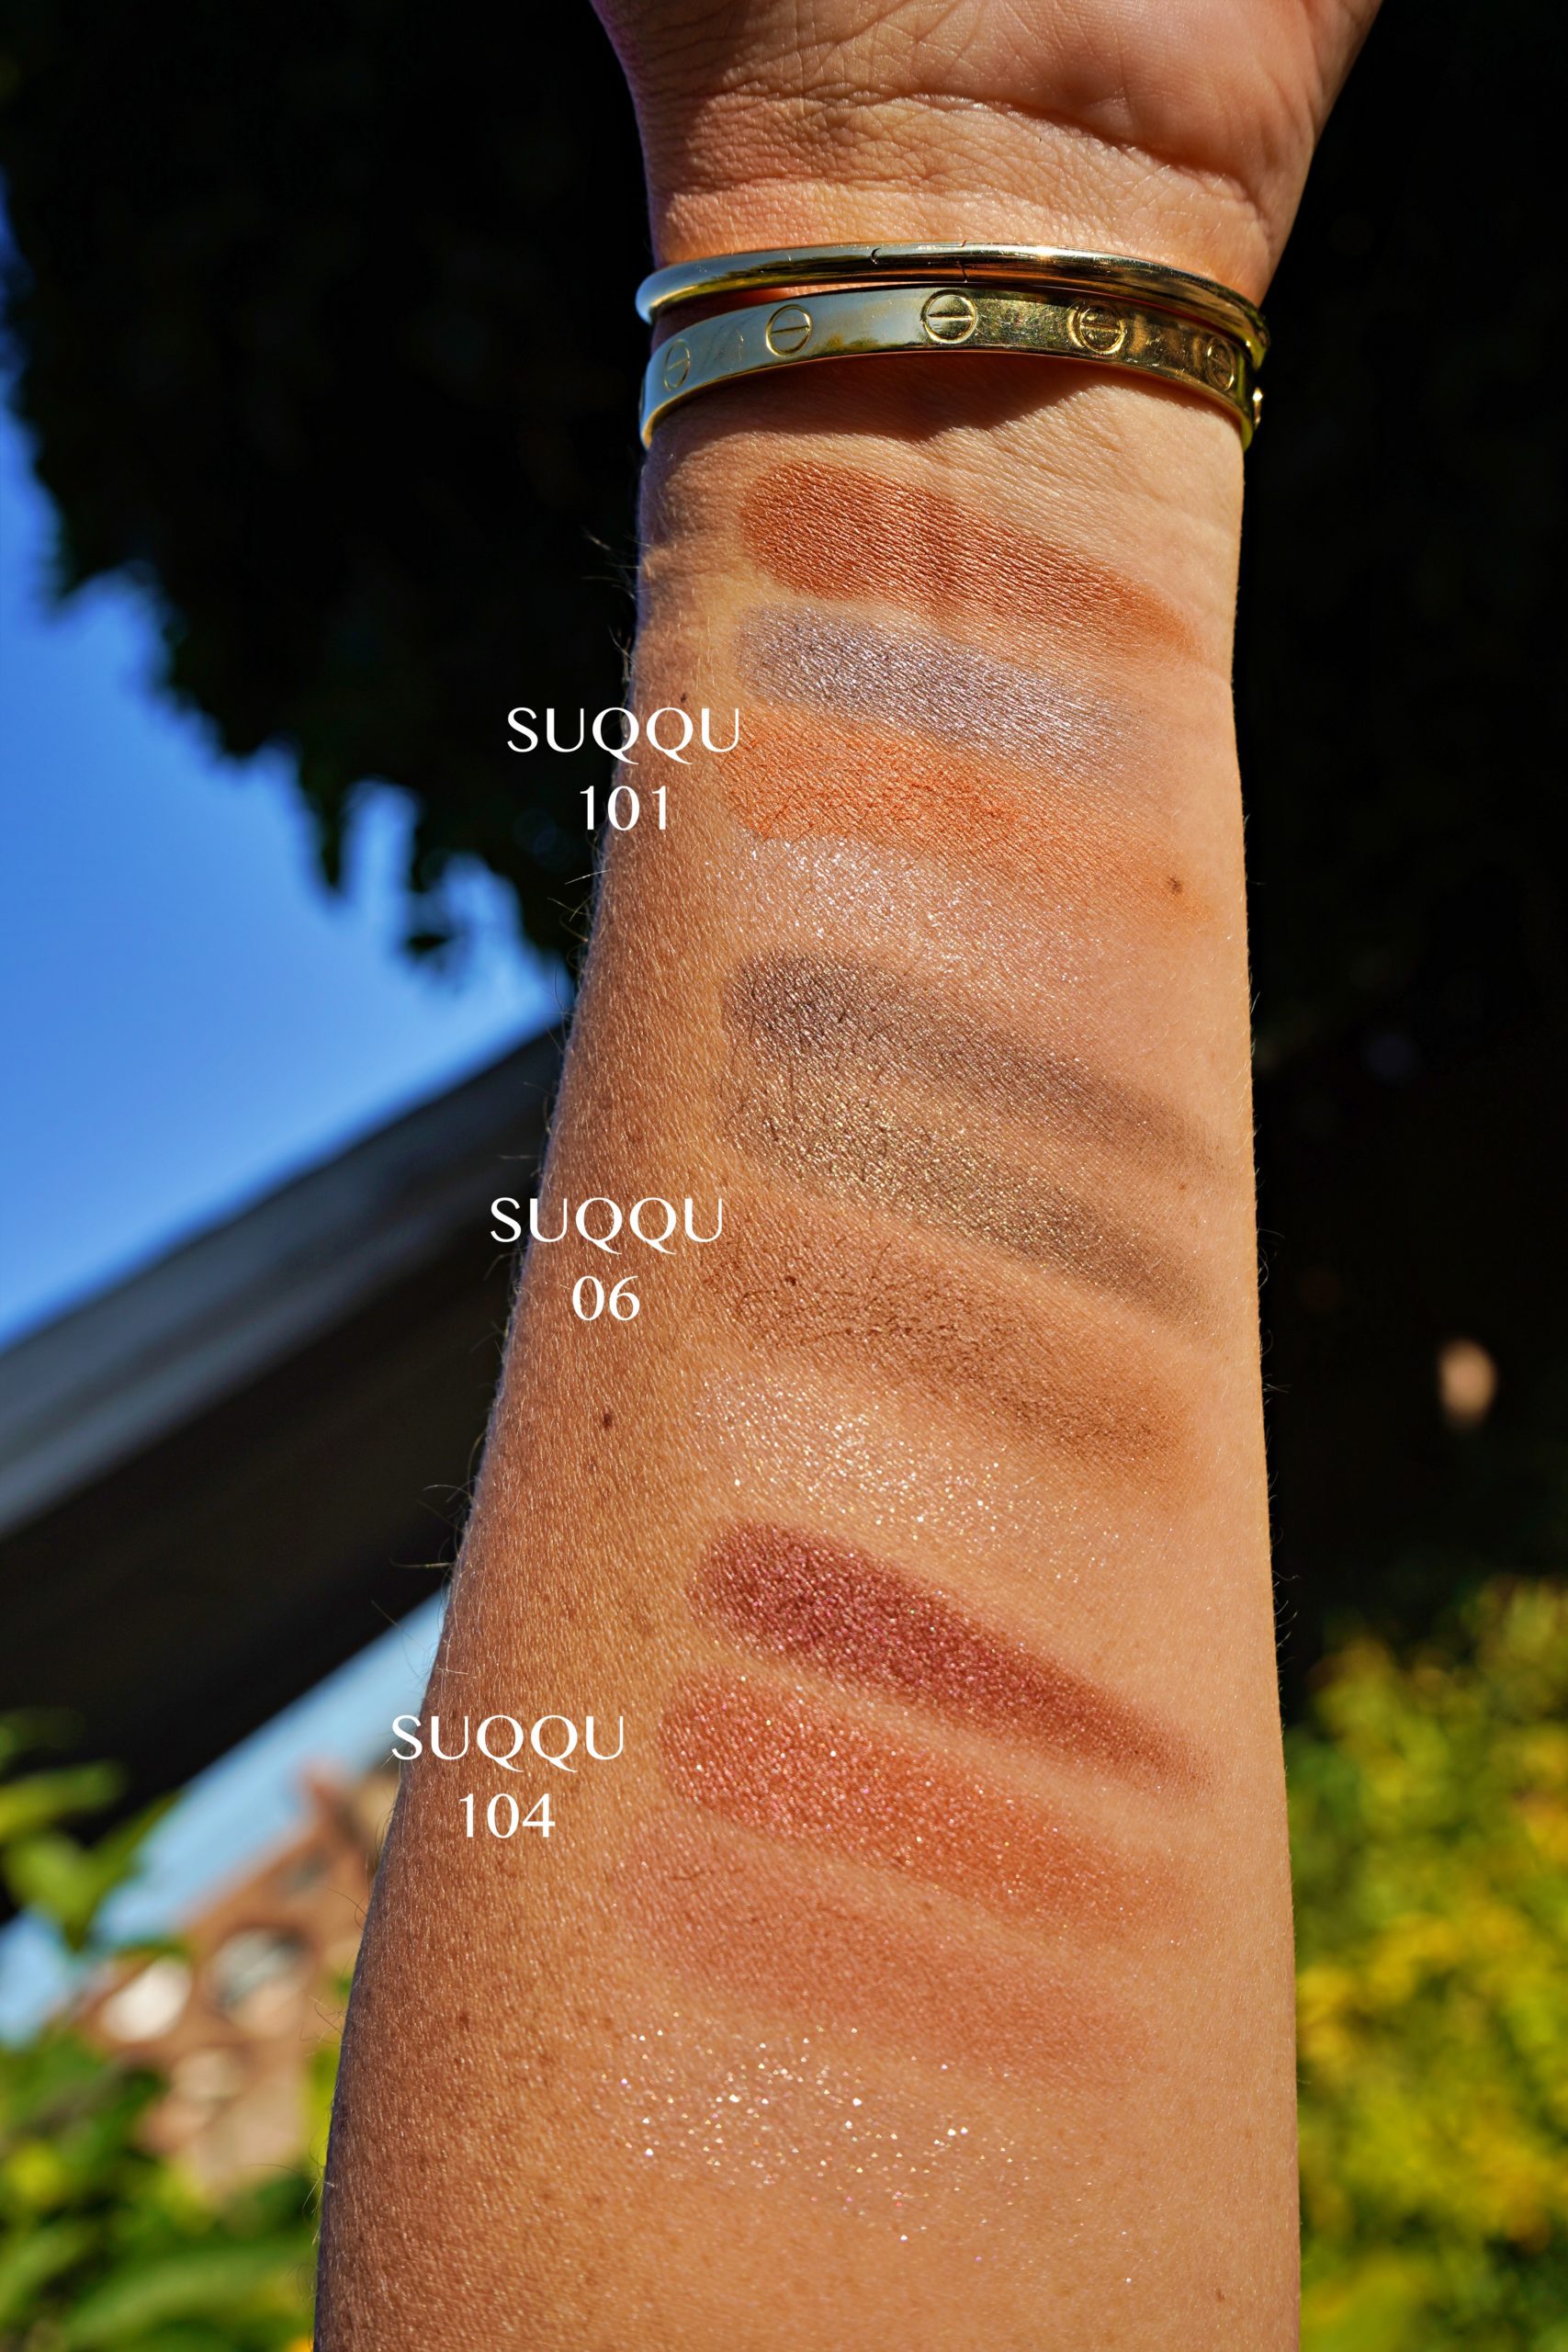 SUQQU eyeshadow swatches in direct sunlight